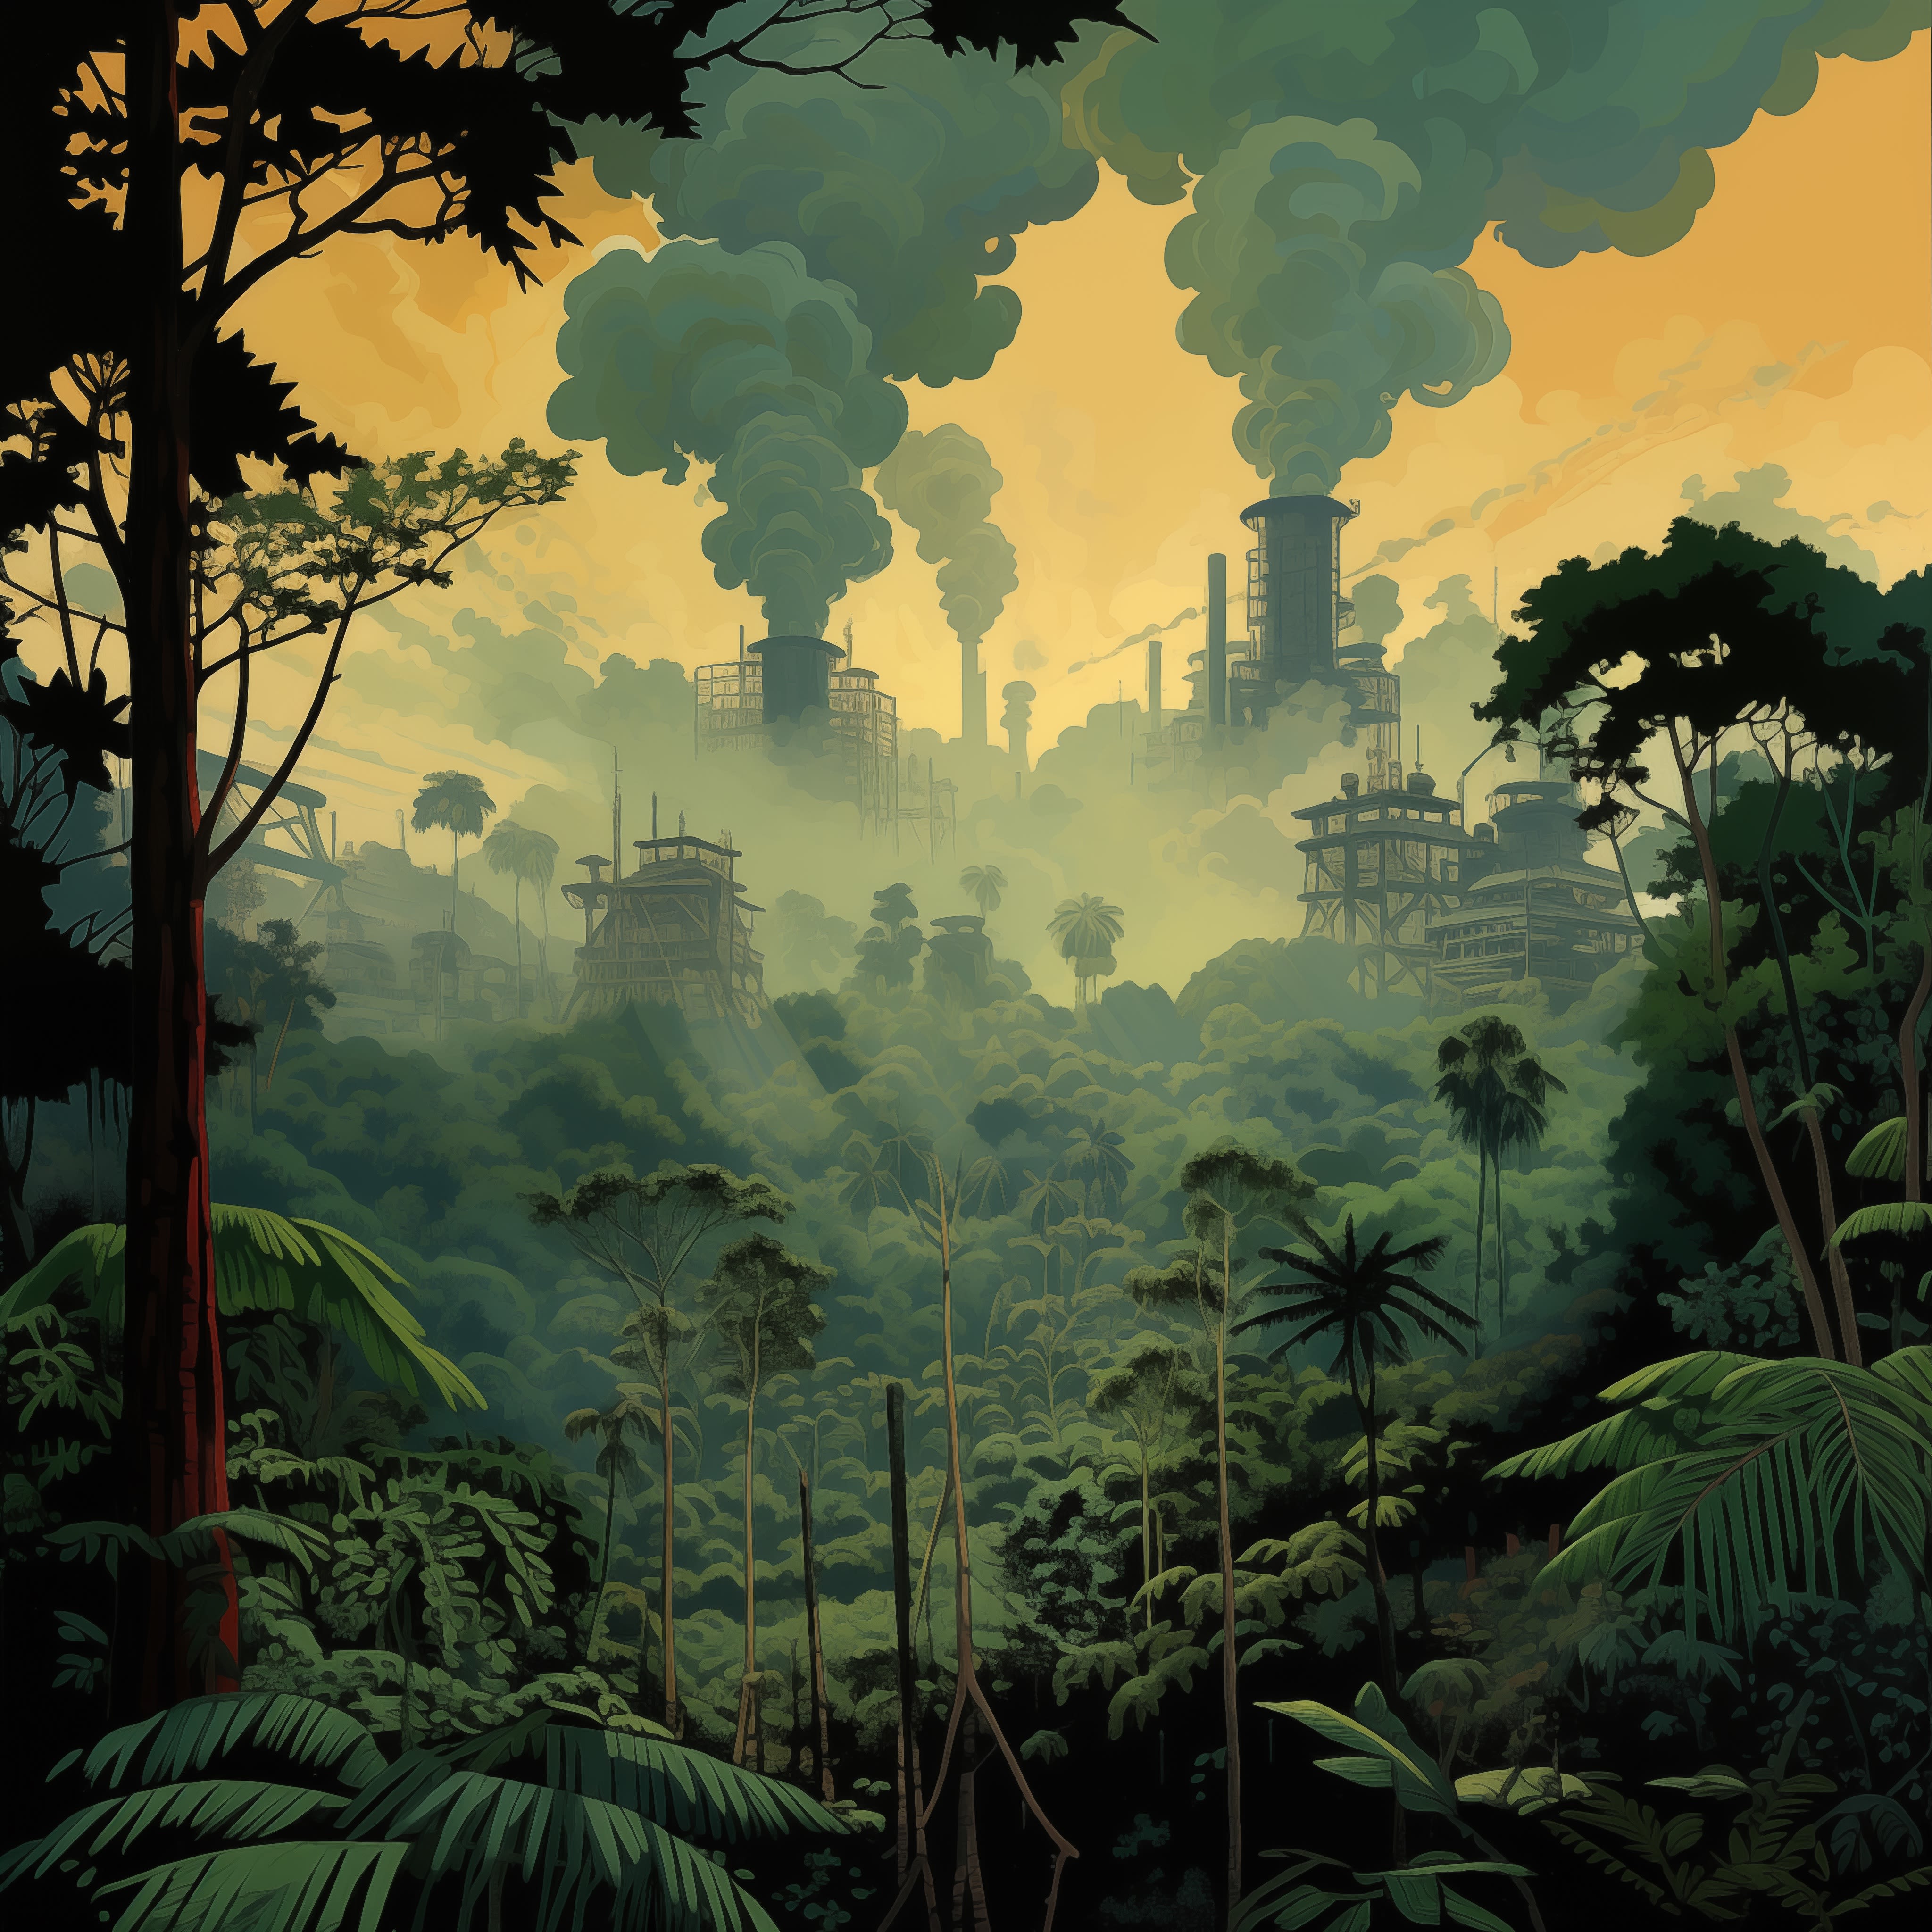 Lush tropical forest surrounded by the fumes of industrial activities and carbon emissions